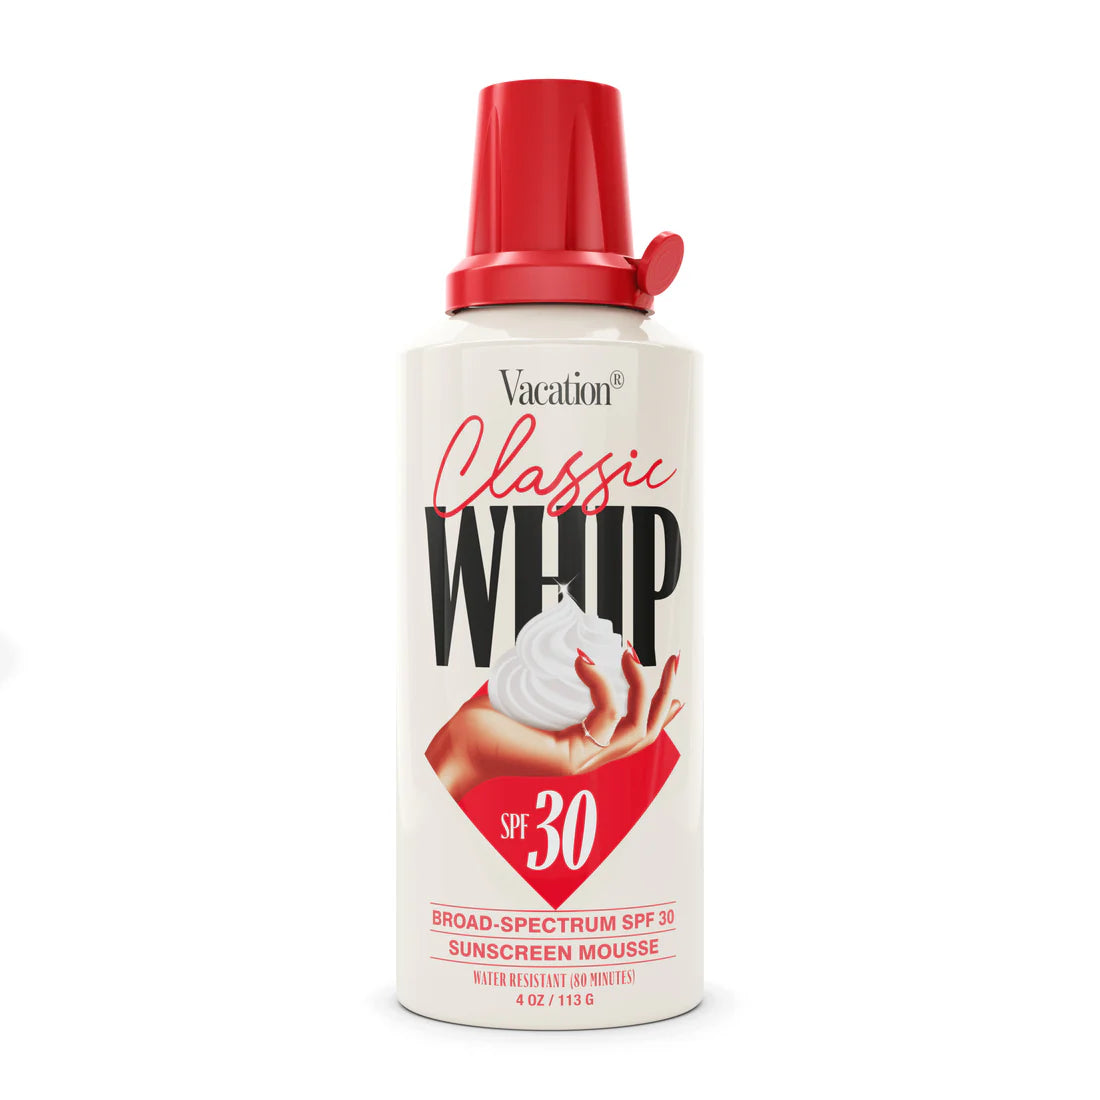 A sunscreen mousse product labeled "Vacation Classic Whip SPF 30 Sunscreen Mousse" in a white canister with a red spray nozzle, marketed for broad-spectrum UV protection.